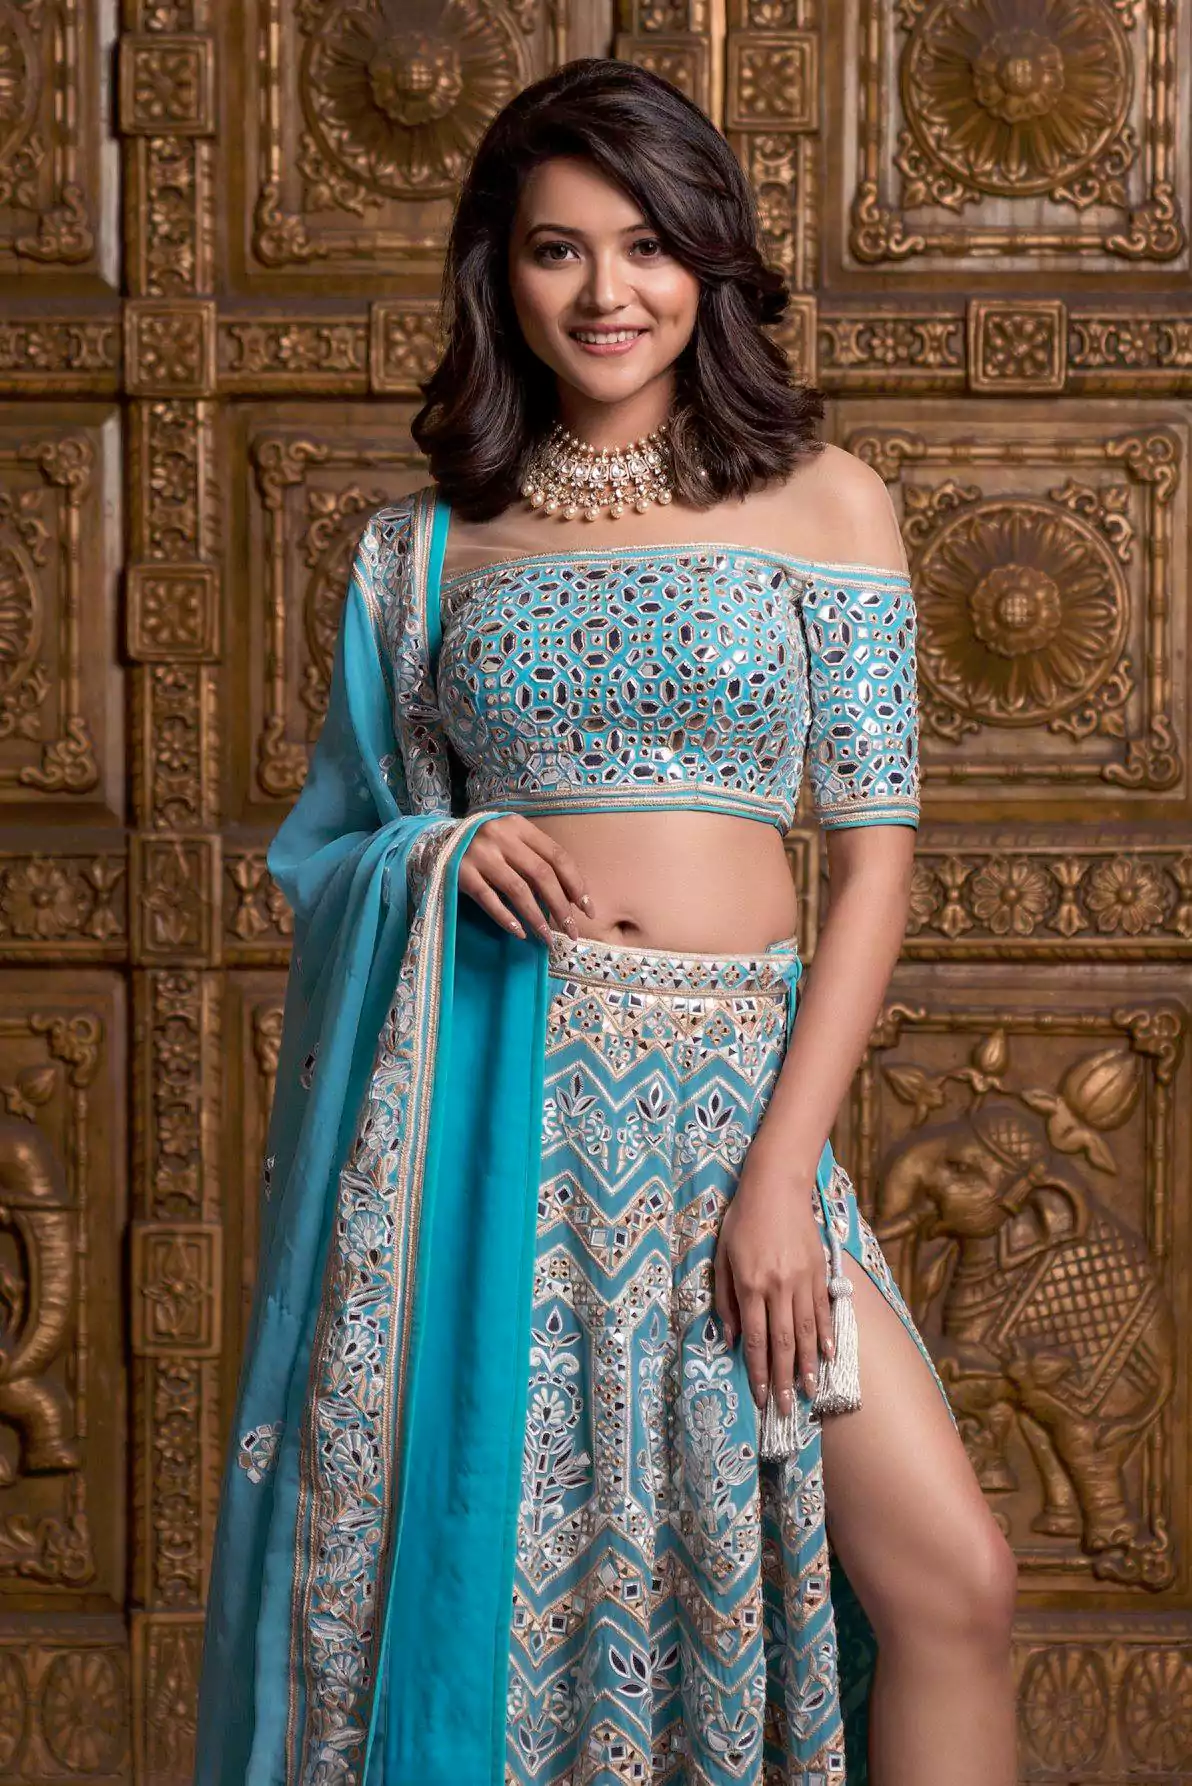 Mary Khyriem - Most Beautiful Meghalaya Women - Meghalaya Actresses, Miss, Models, Social Influencers (See List) Hottest North Eastern Indian Girls